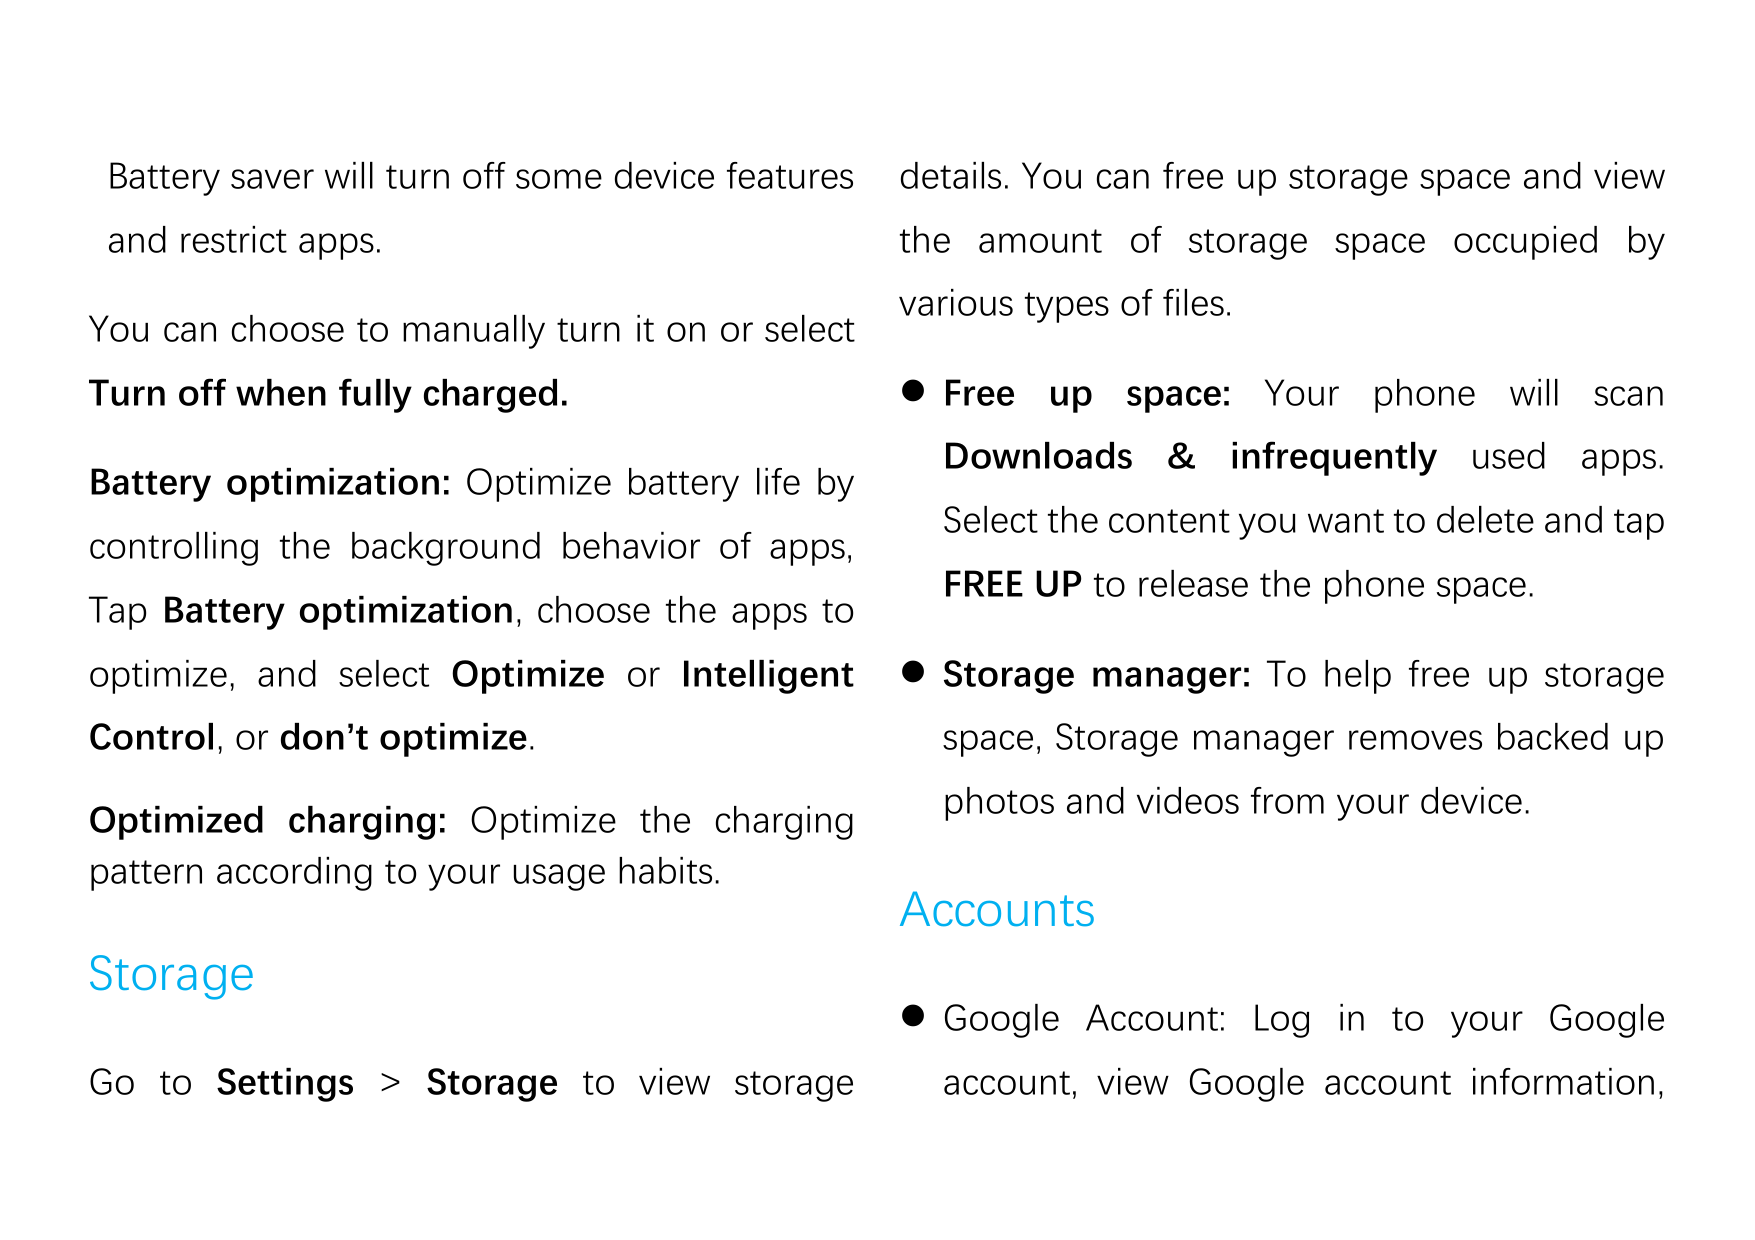 Battery saver will turn off some device featuresdetails. You can free up storage space and viewand restrict apps.the amount of s